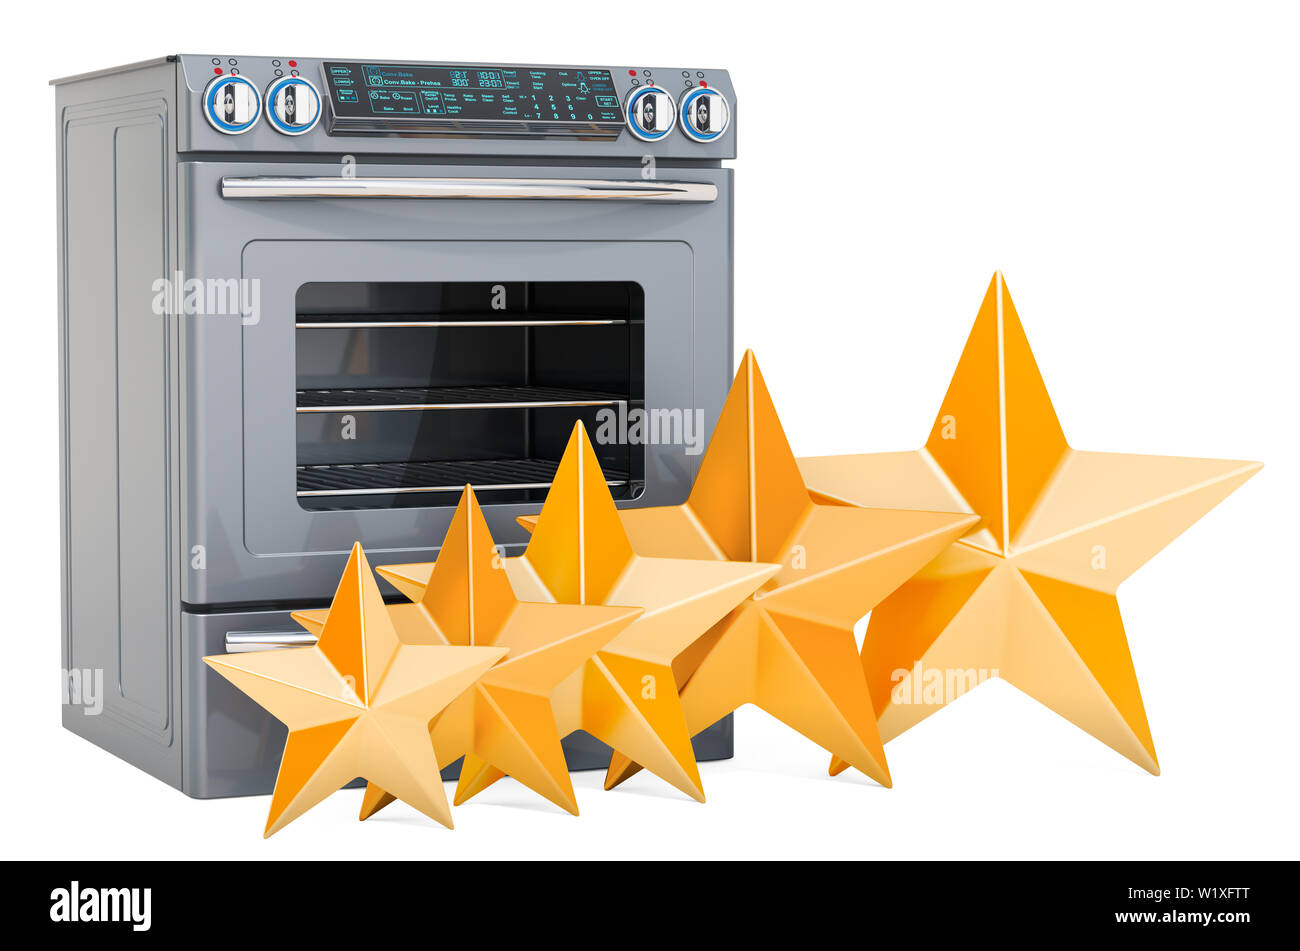 Customer rating of kitchen stove, concept. 3D rendering Stock Photo